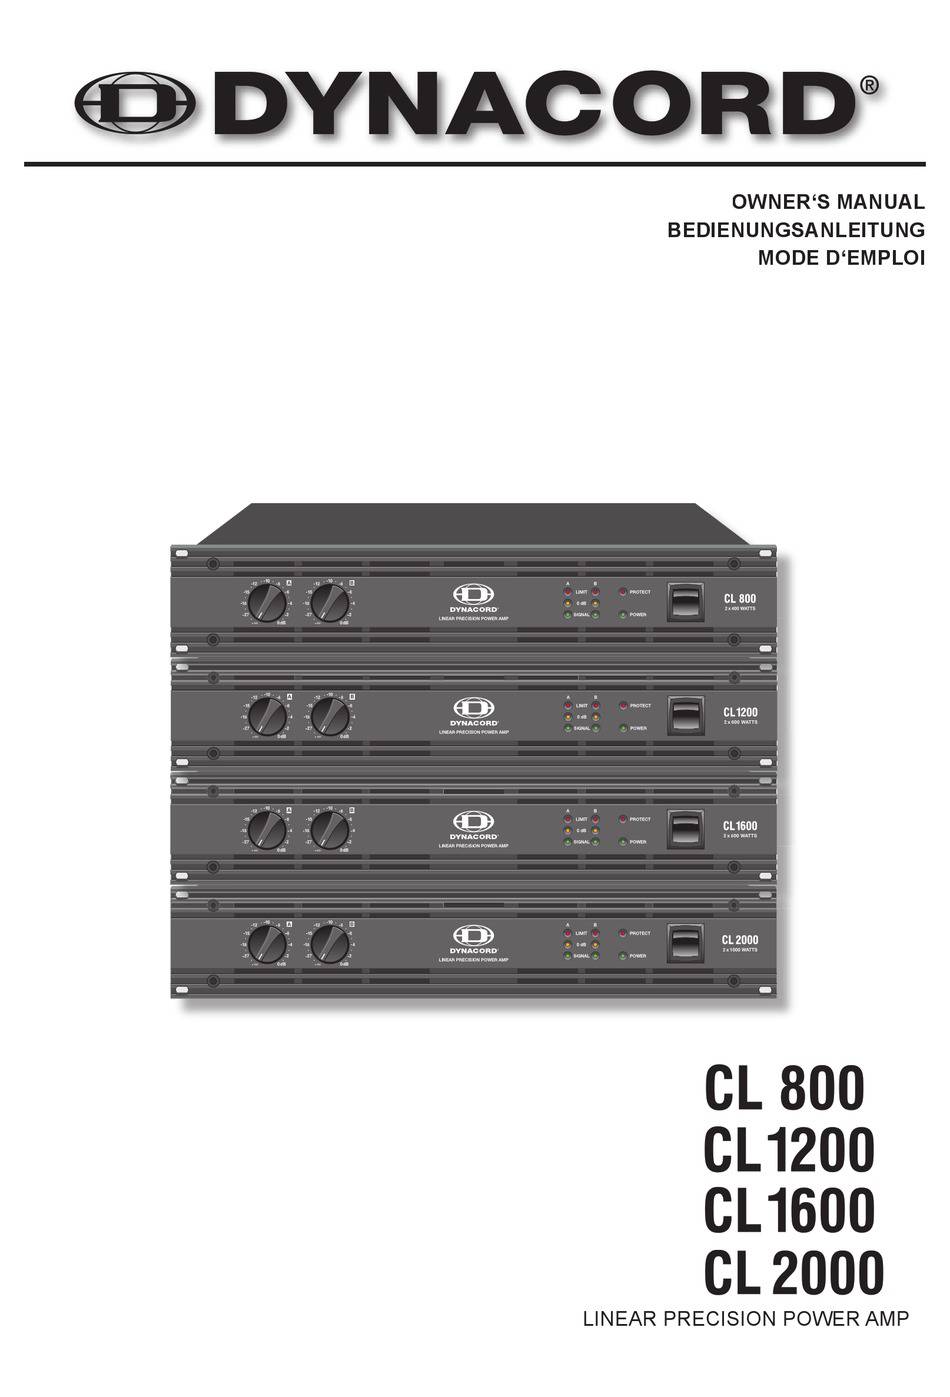 Dynacord CL 800